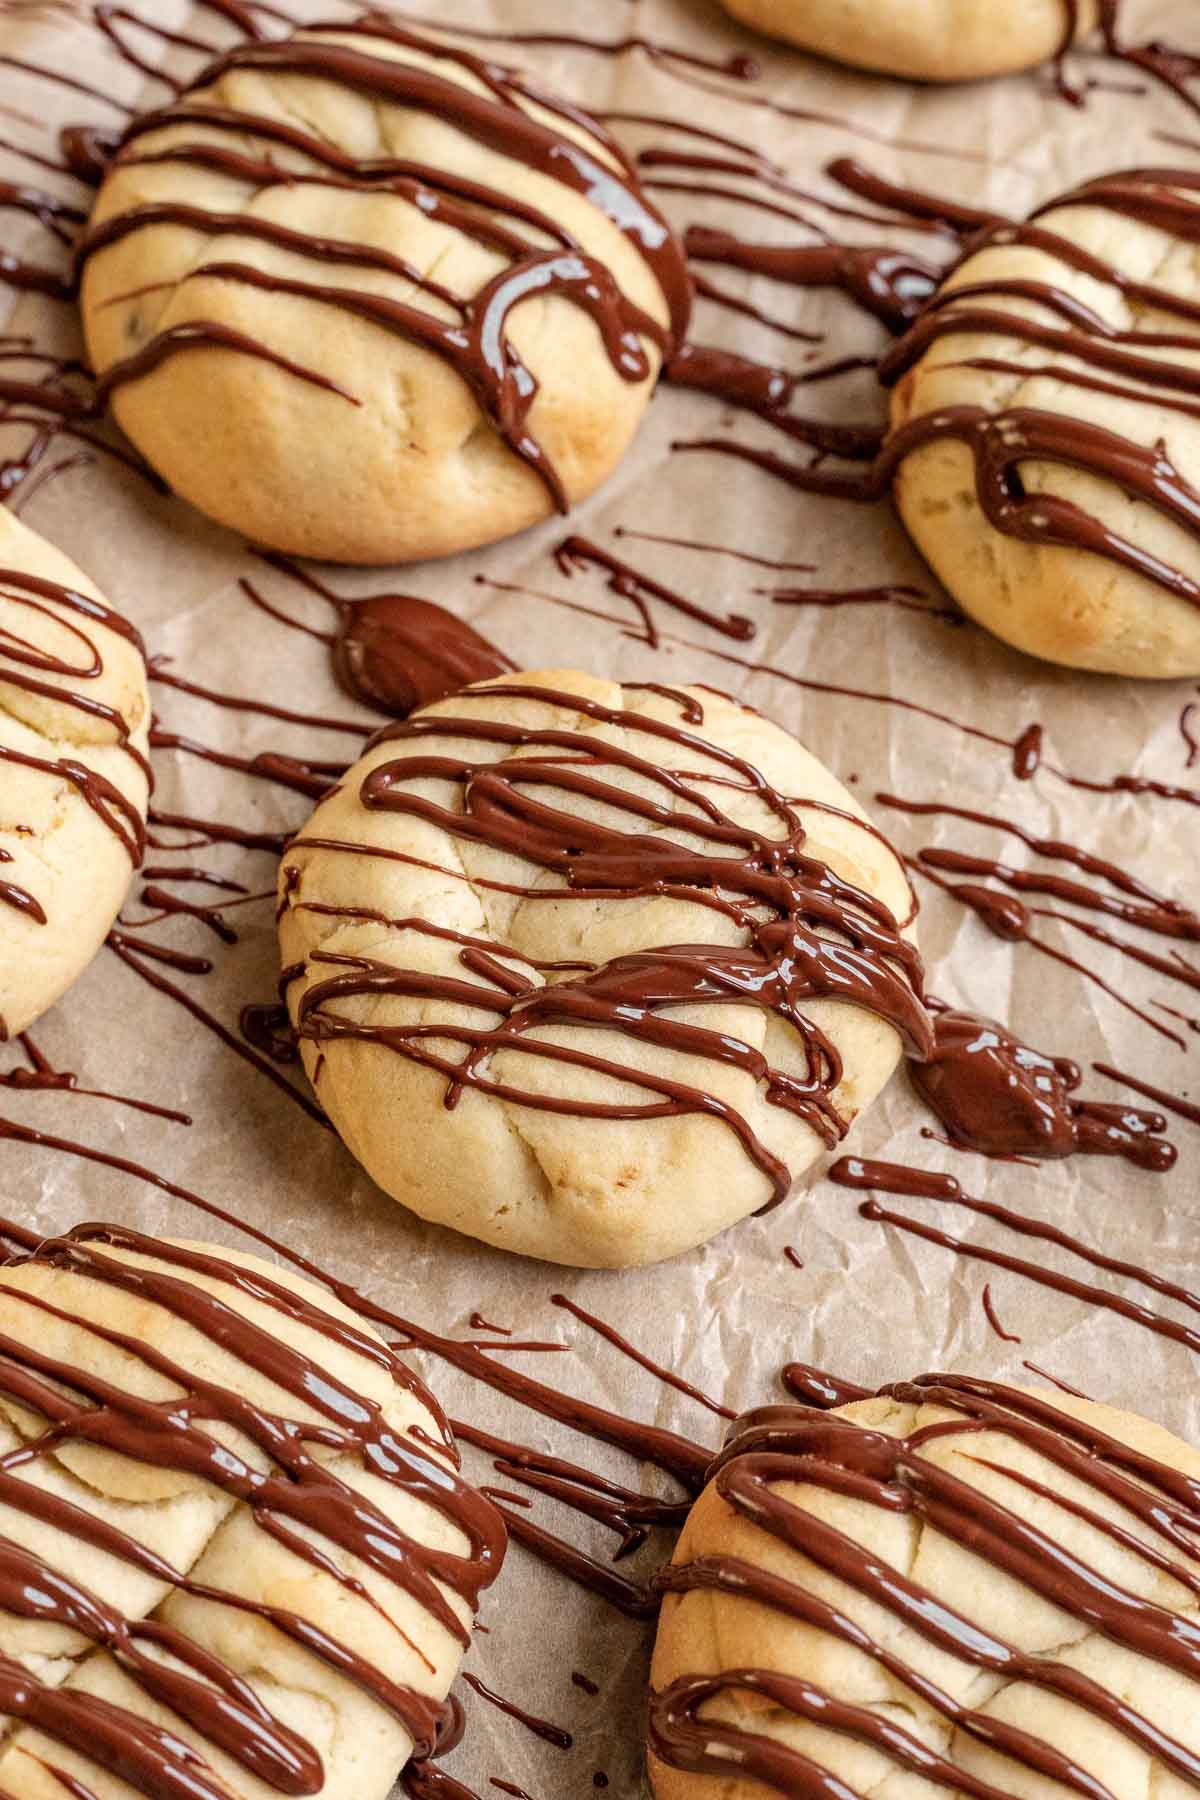 Peppermint Filled Cookies on baking sheet with chocolate drizzle